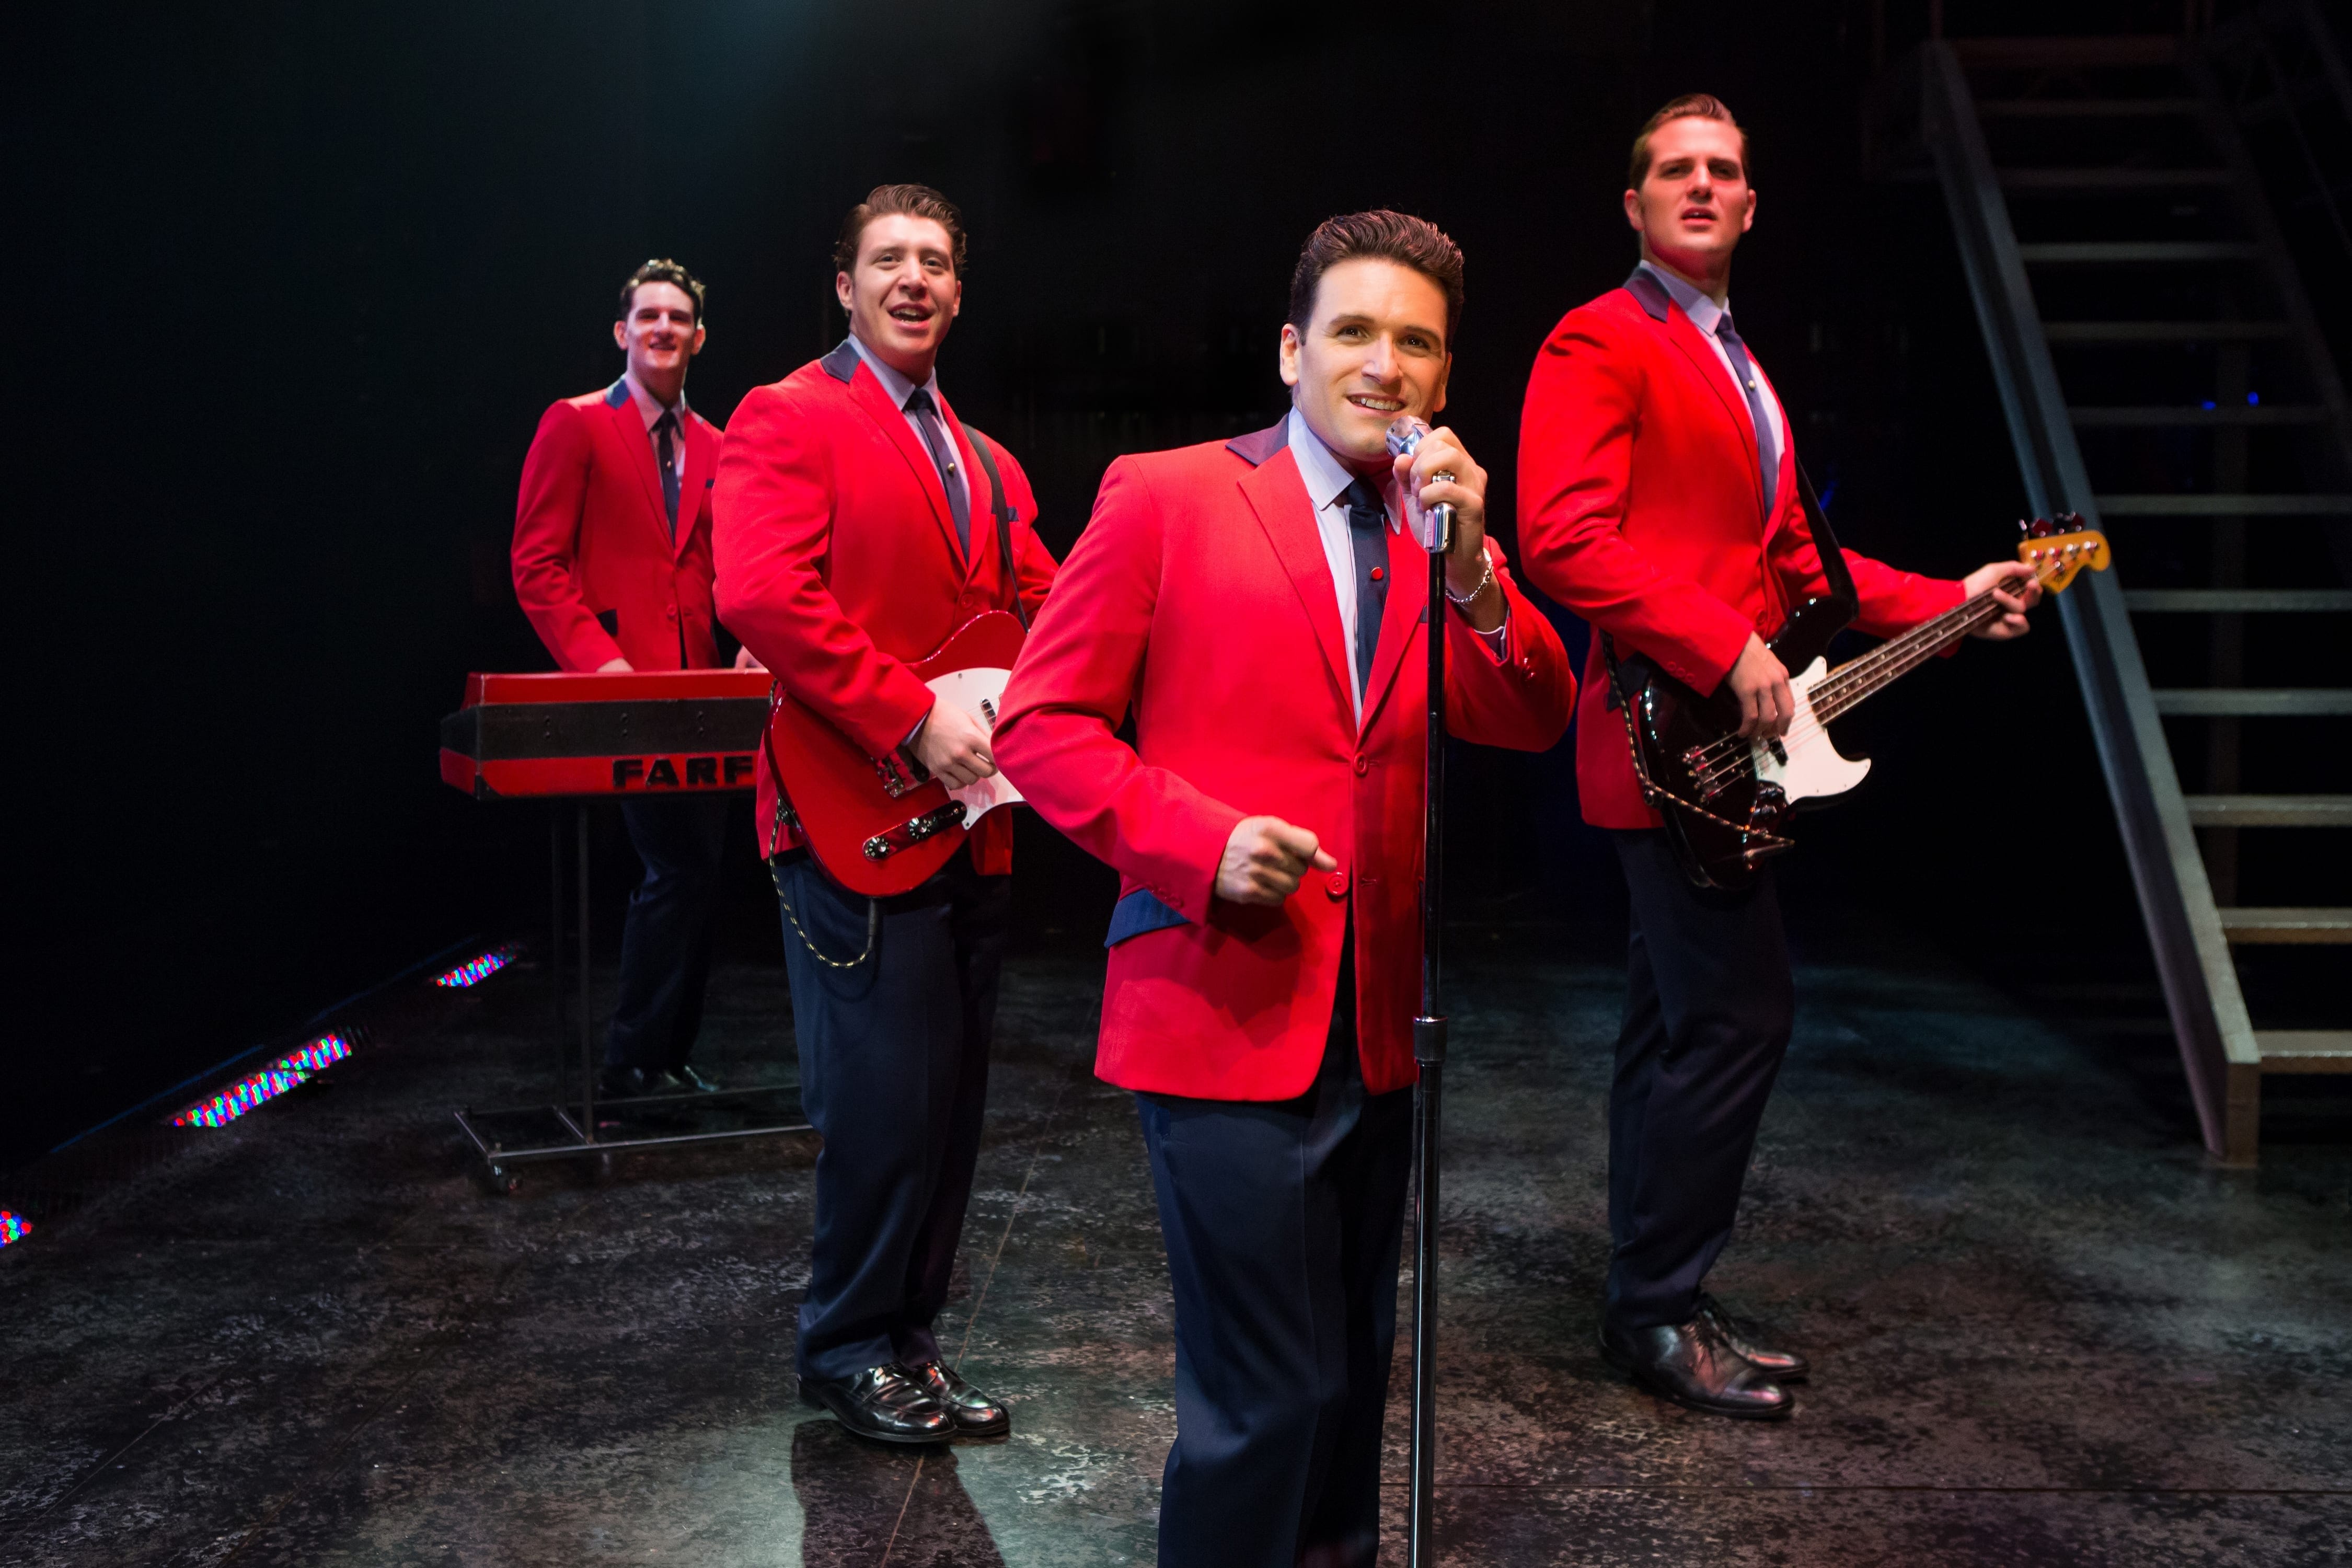 A quartet in red jackets.